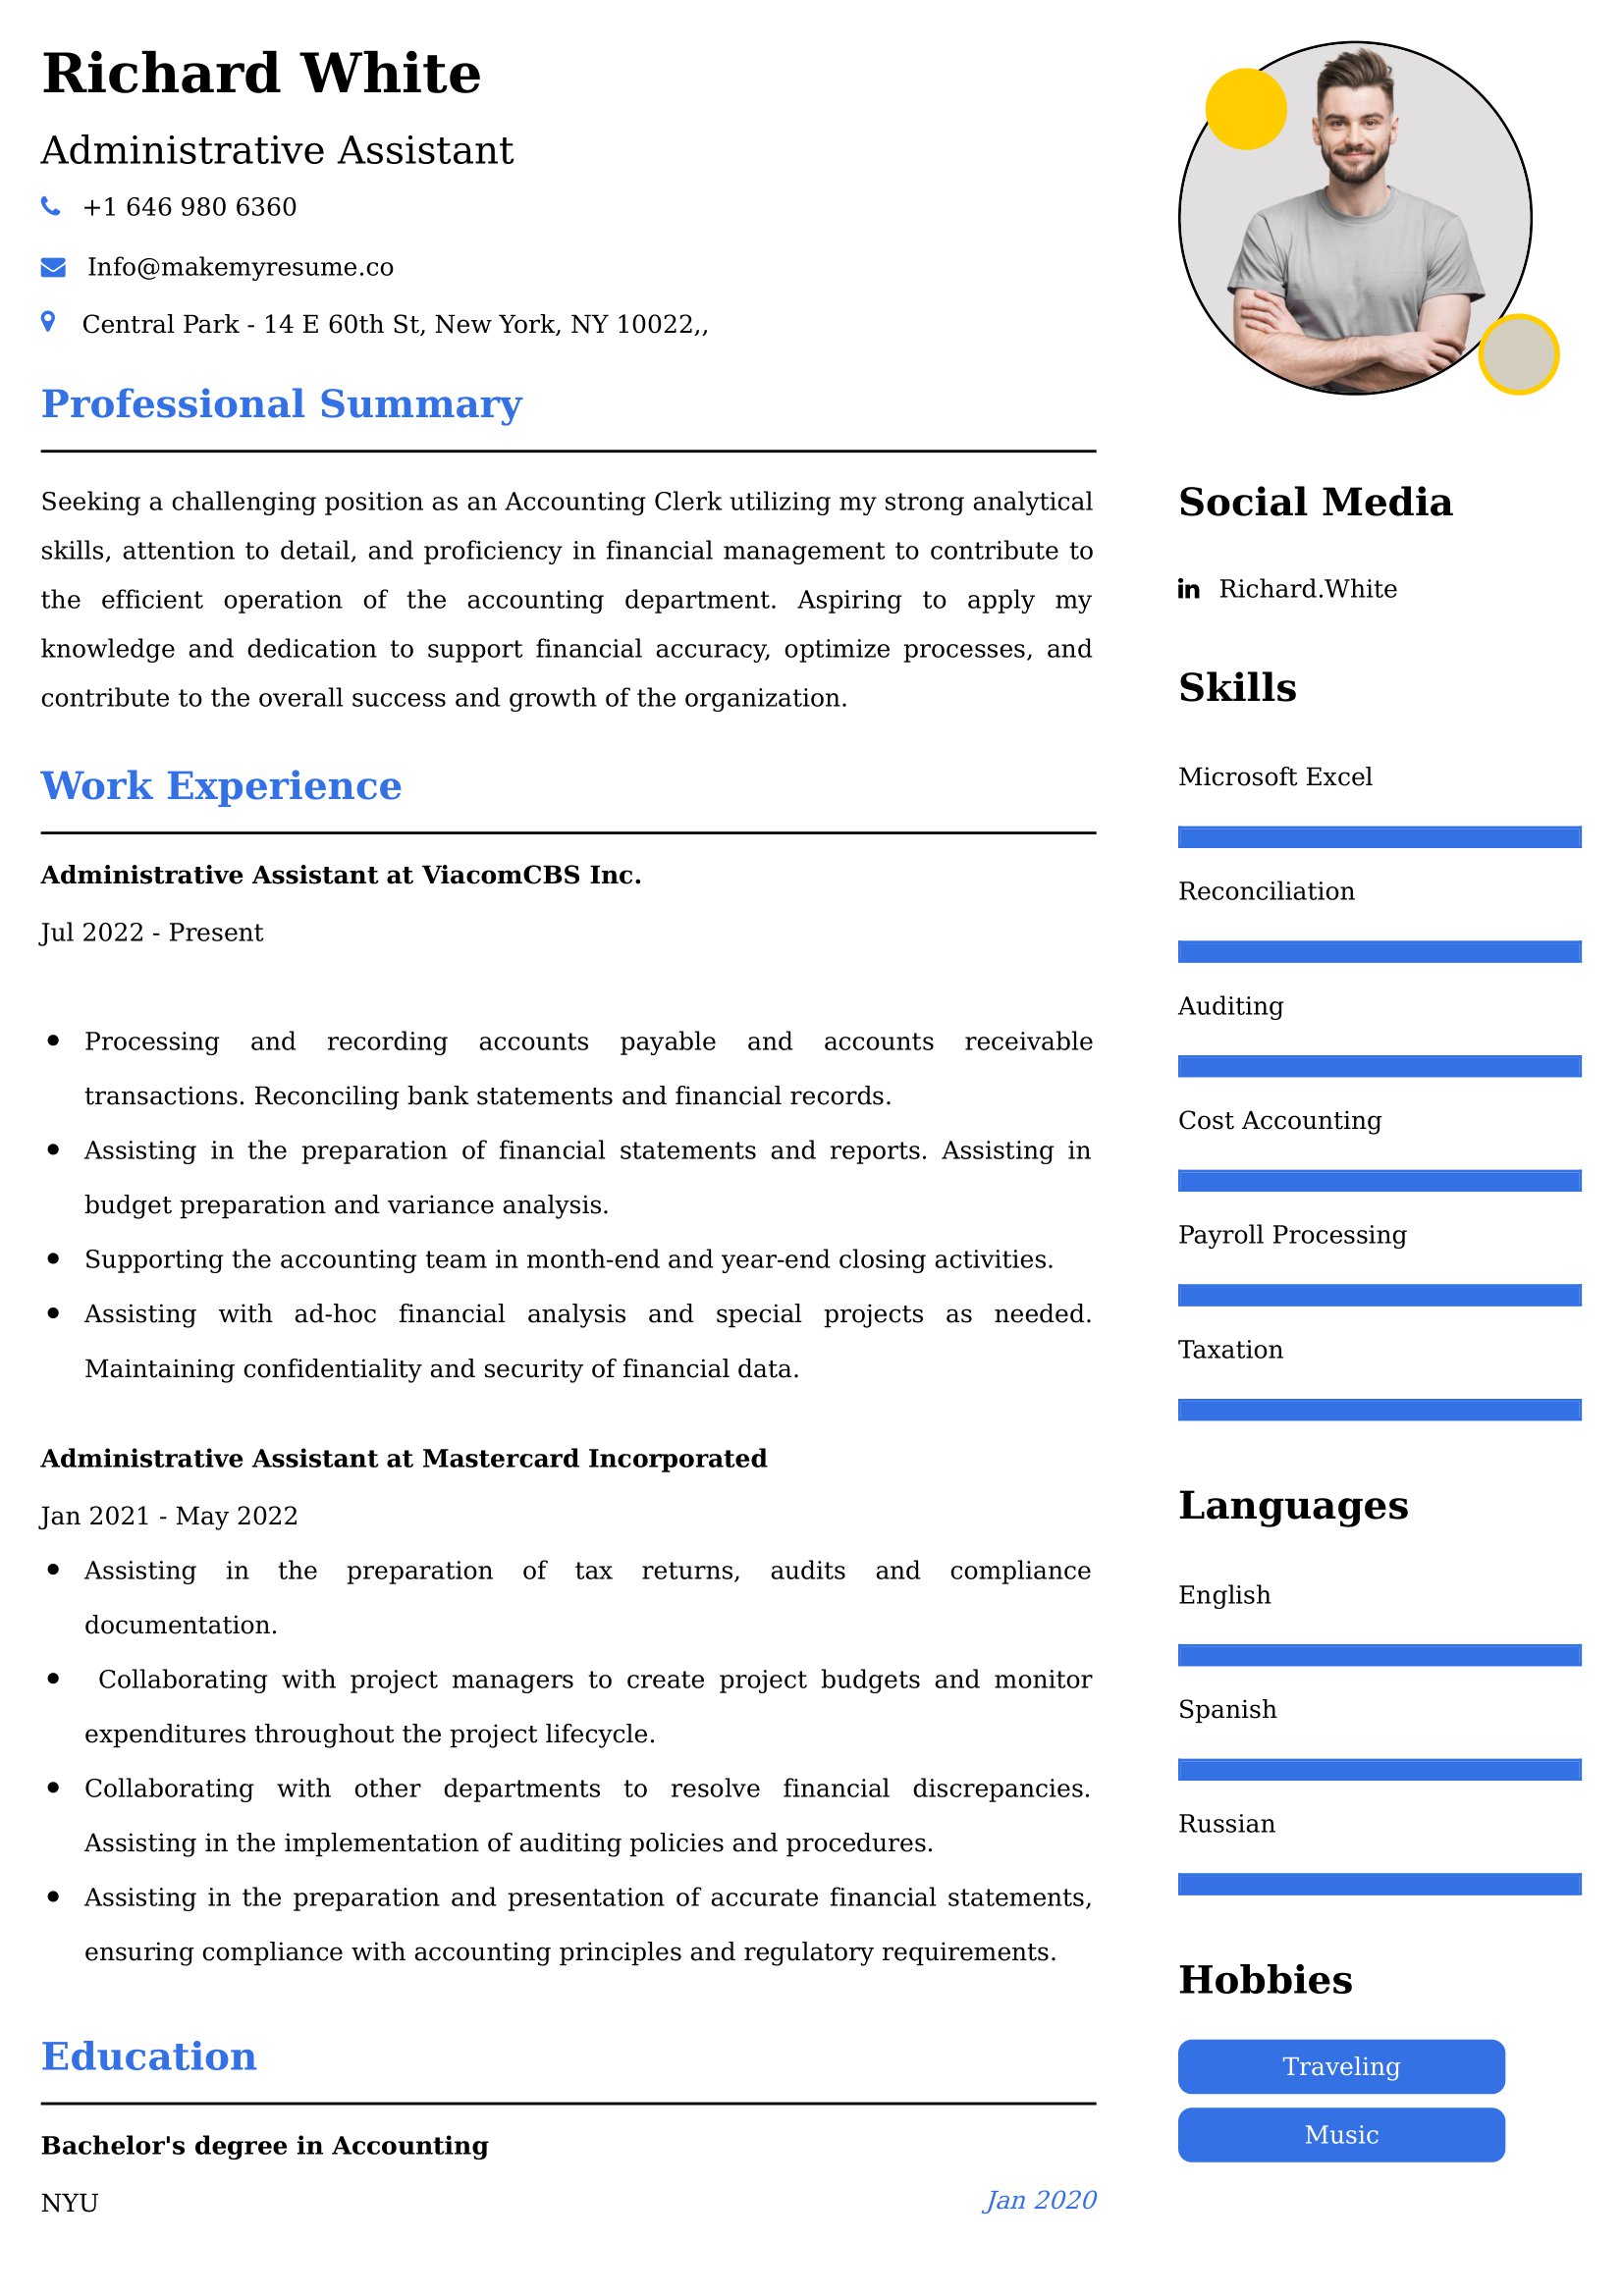 Administrative Assistant Resume Examples - Brazilian Format, Latest Template